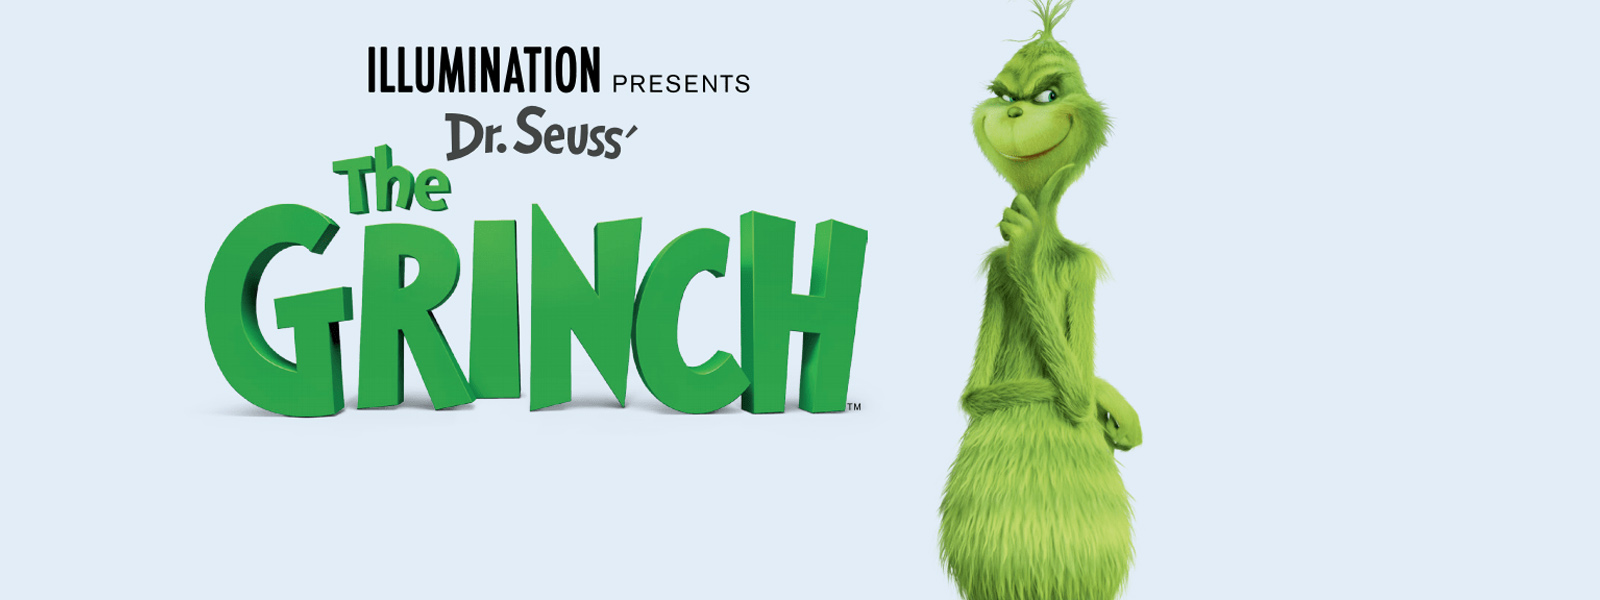 The Grinch' expected to steal box office top spot